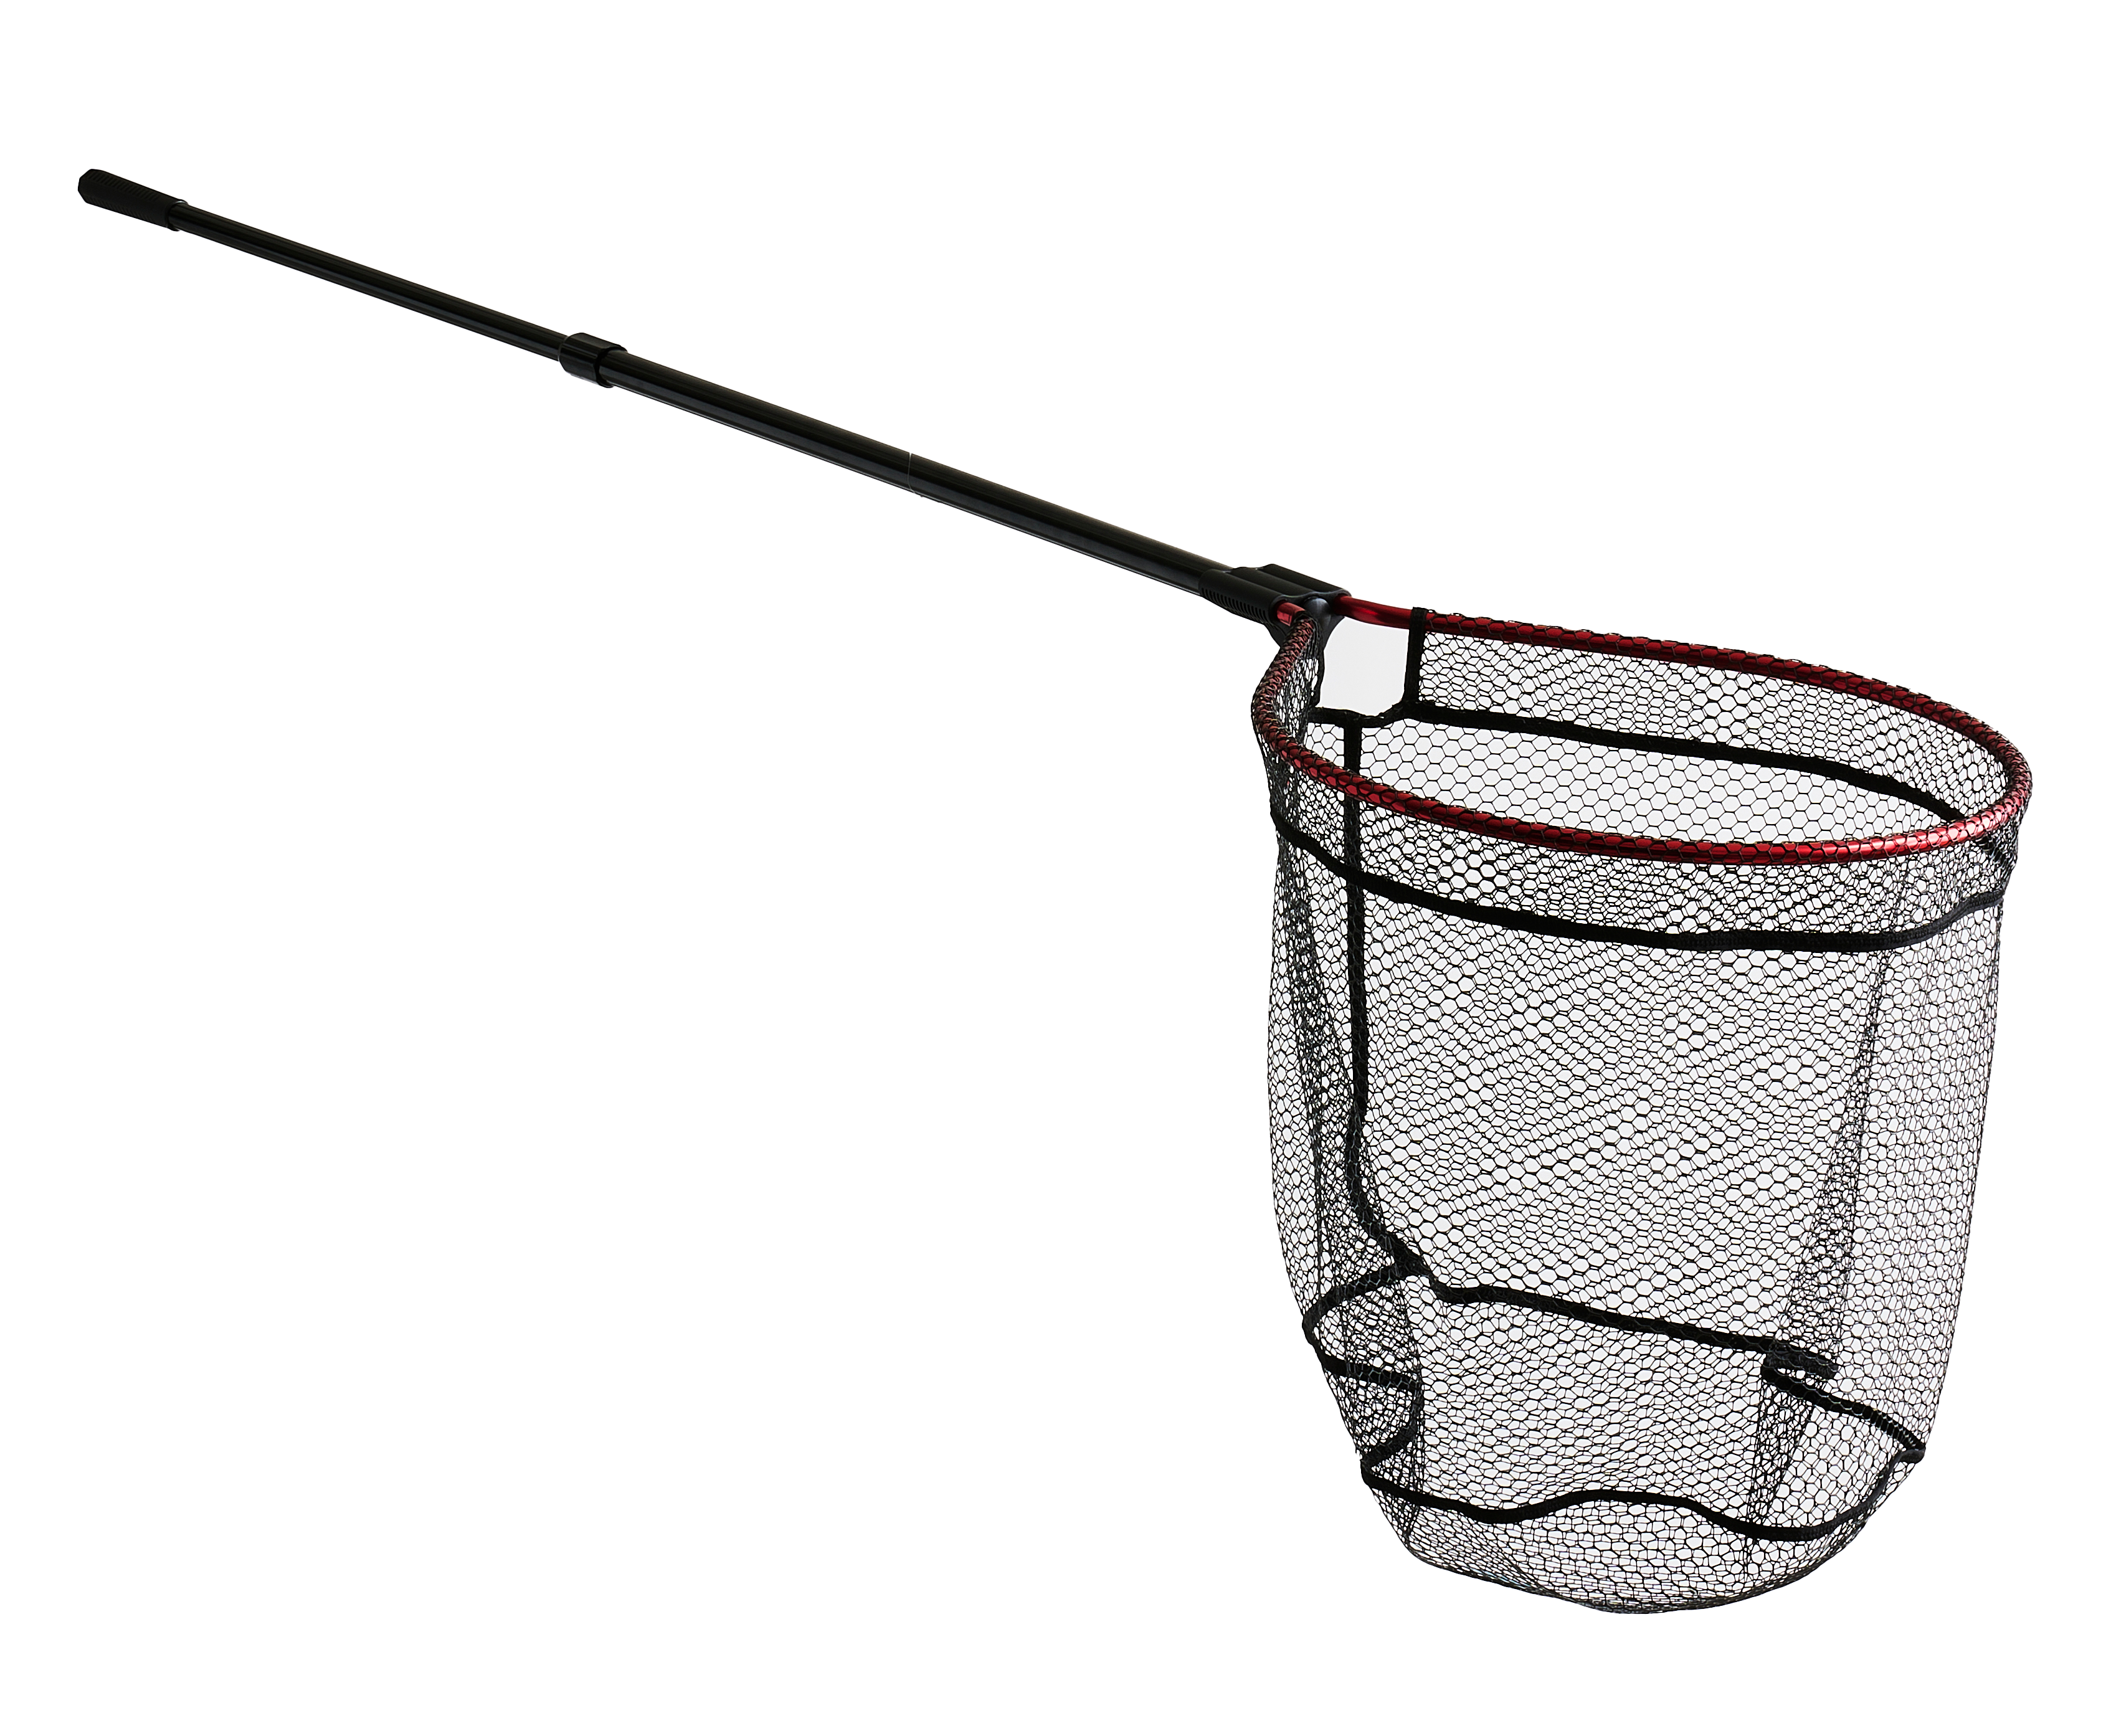 Fly fishing nets, magnets & replacement nets